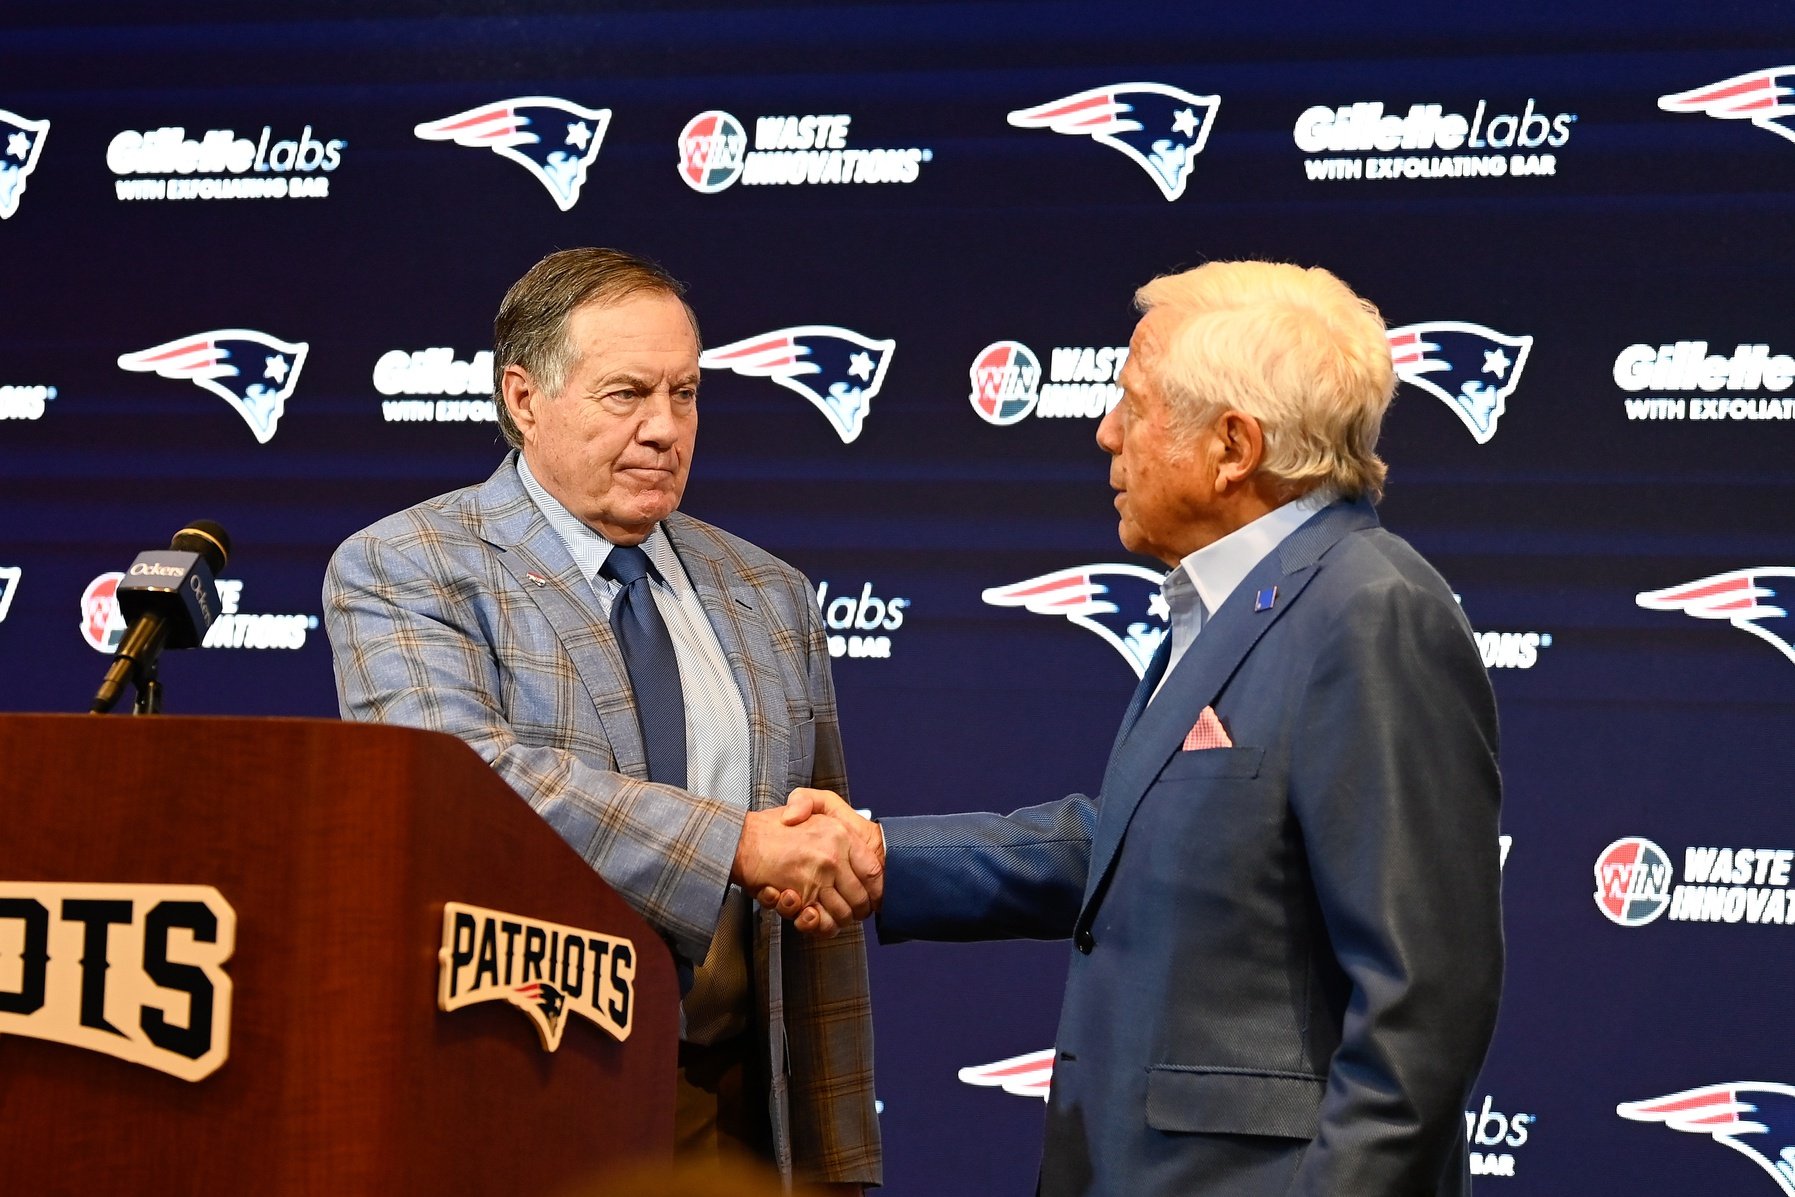 New England Patriots former head coach Bill Belichick (left) shakes hands with Patriots owner Robert Kraft (right) during a press conference at Gillette Stadium to announce Belichick's exit from the team. Mandatory Credit: Eric Canha-USA TODAY Sports